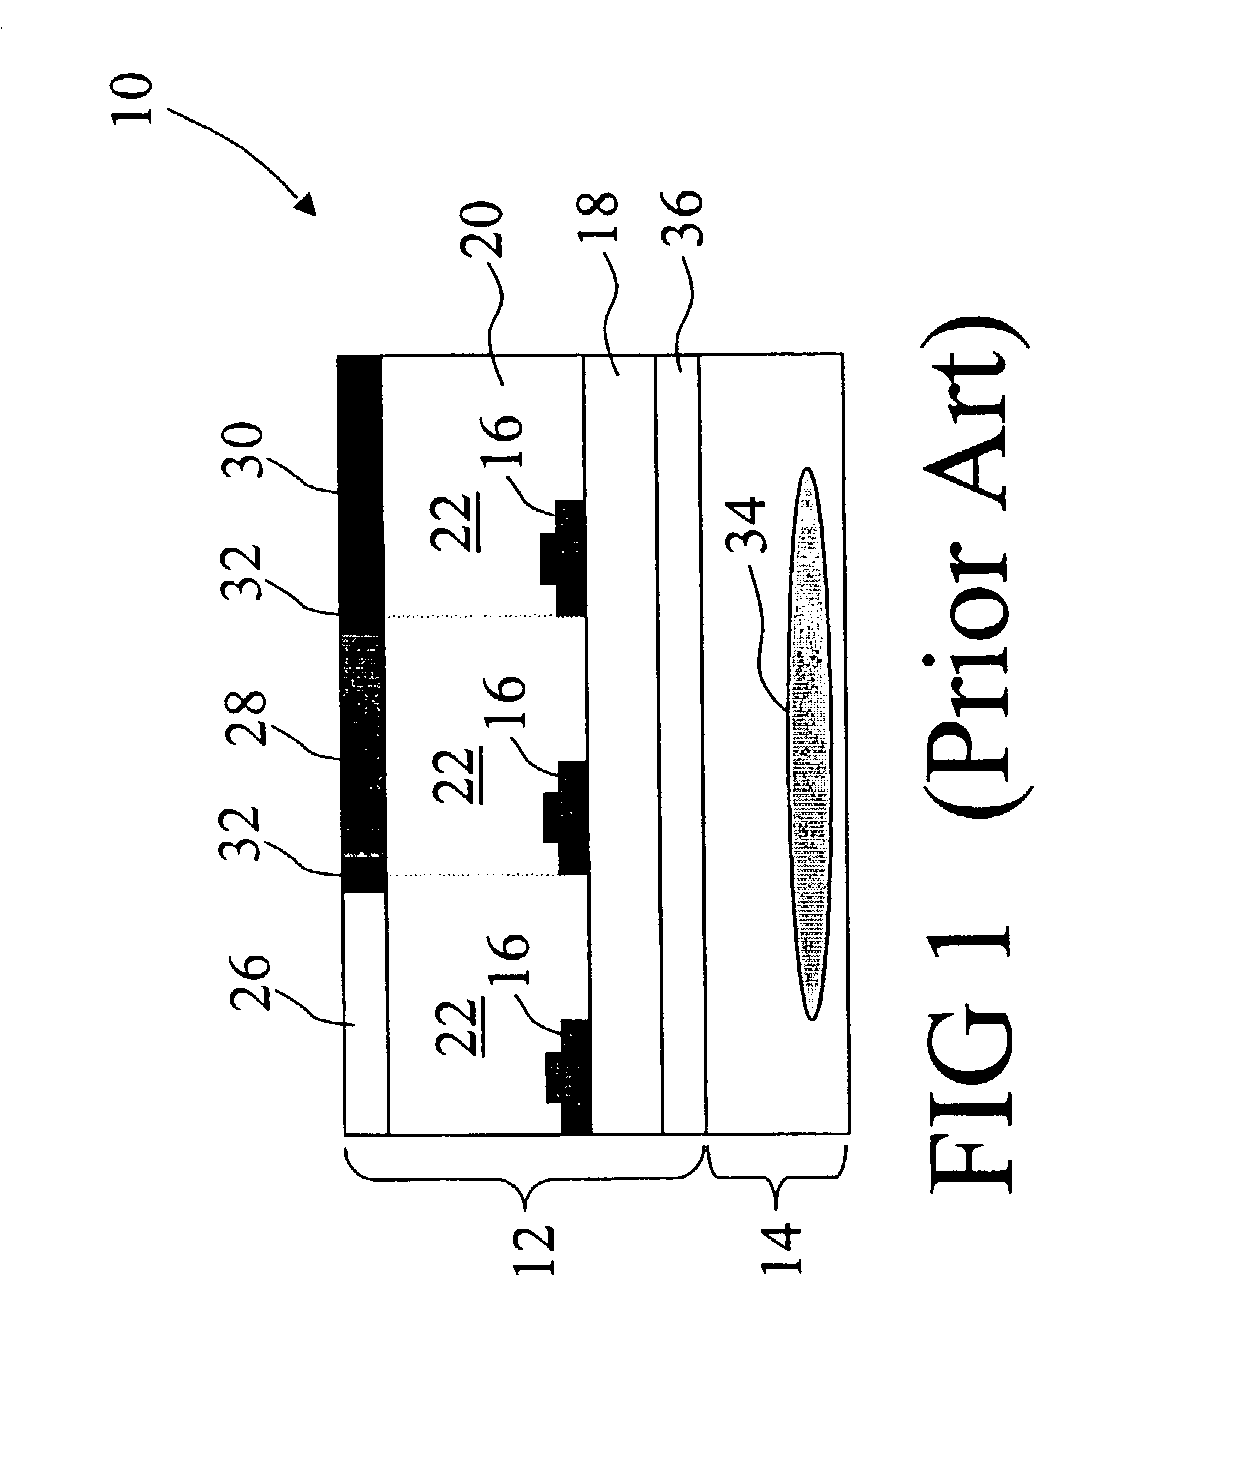 Liquid crystal display with color backlighting employing light emitting diodes